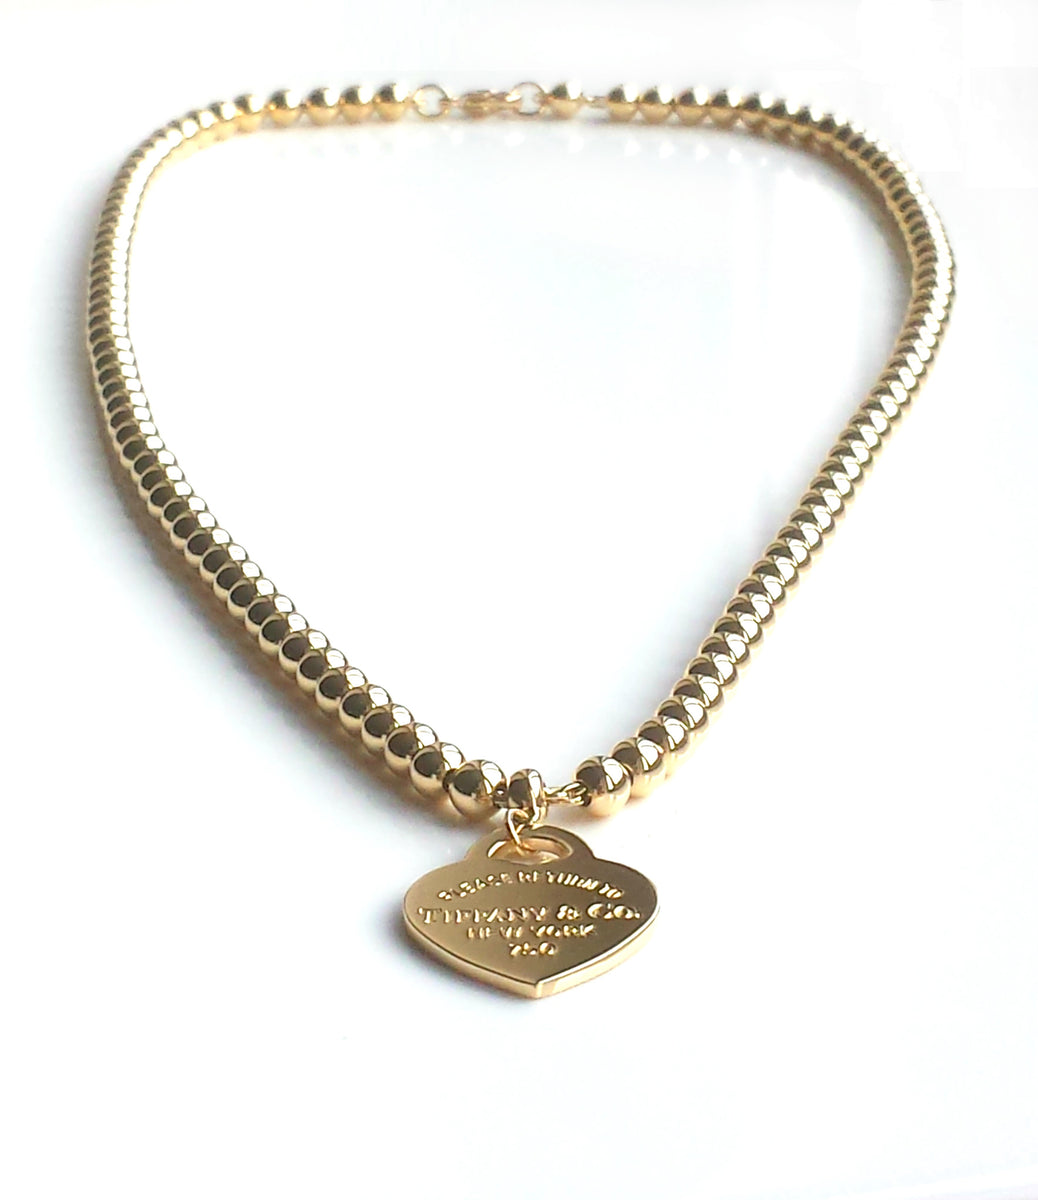 Tiffany & Co. Return to™ 18k Yellow Gold Small Bead Necklace with Hear ...